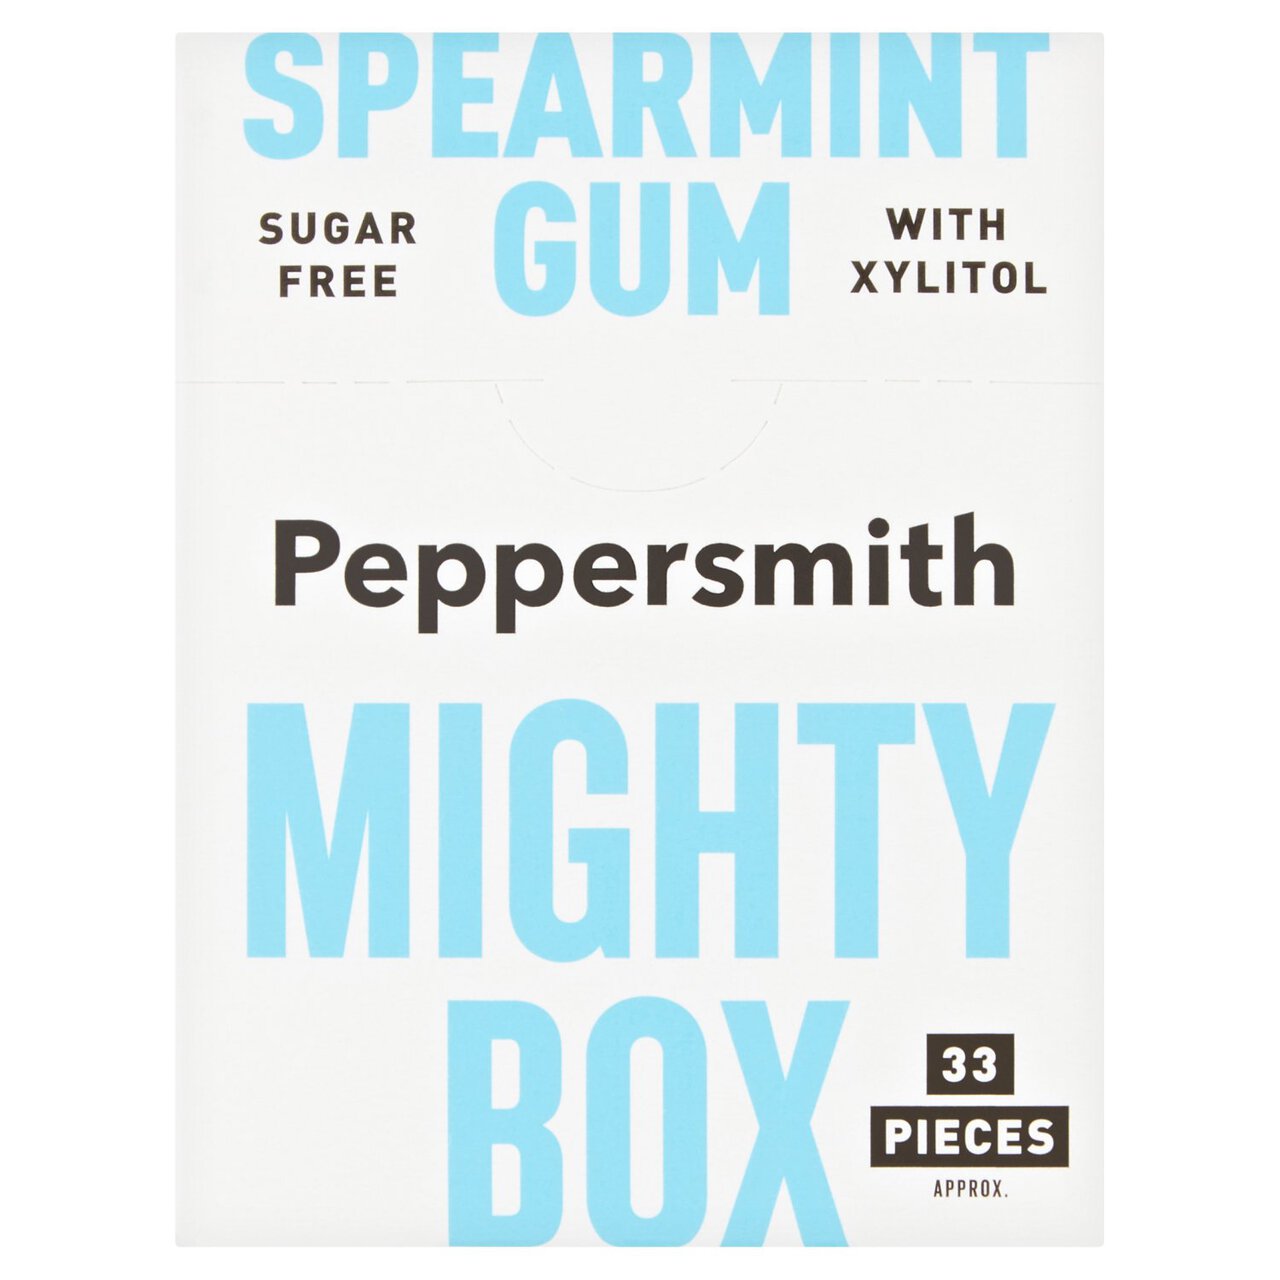 Peppersmith 100% Xylitol Mighty Box Spearmint Gum 50g